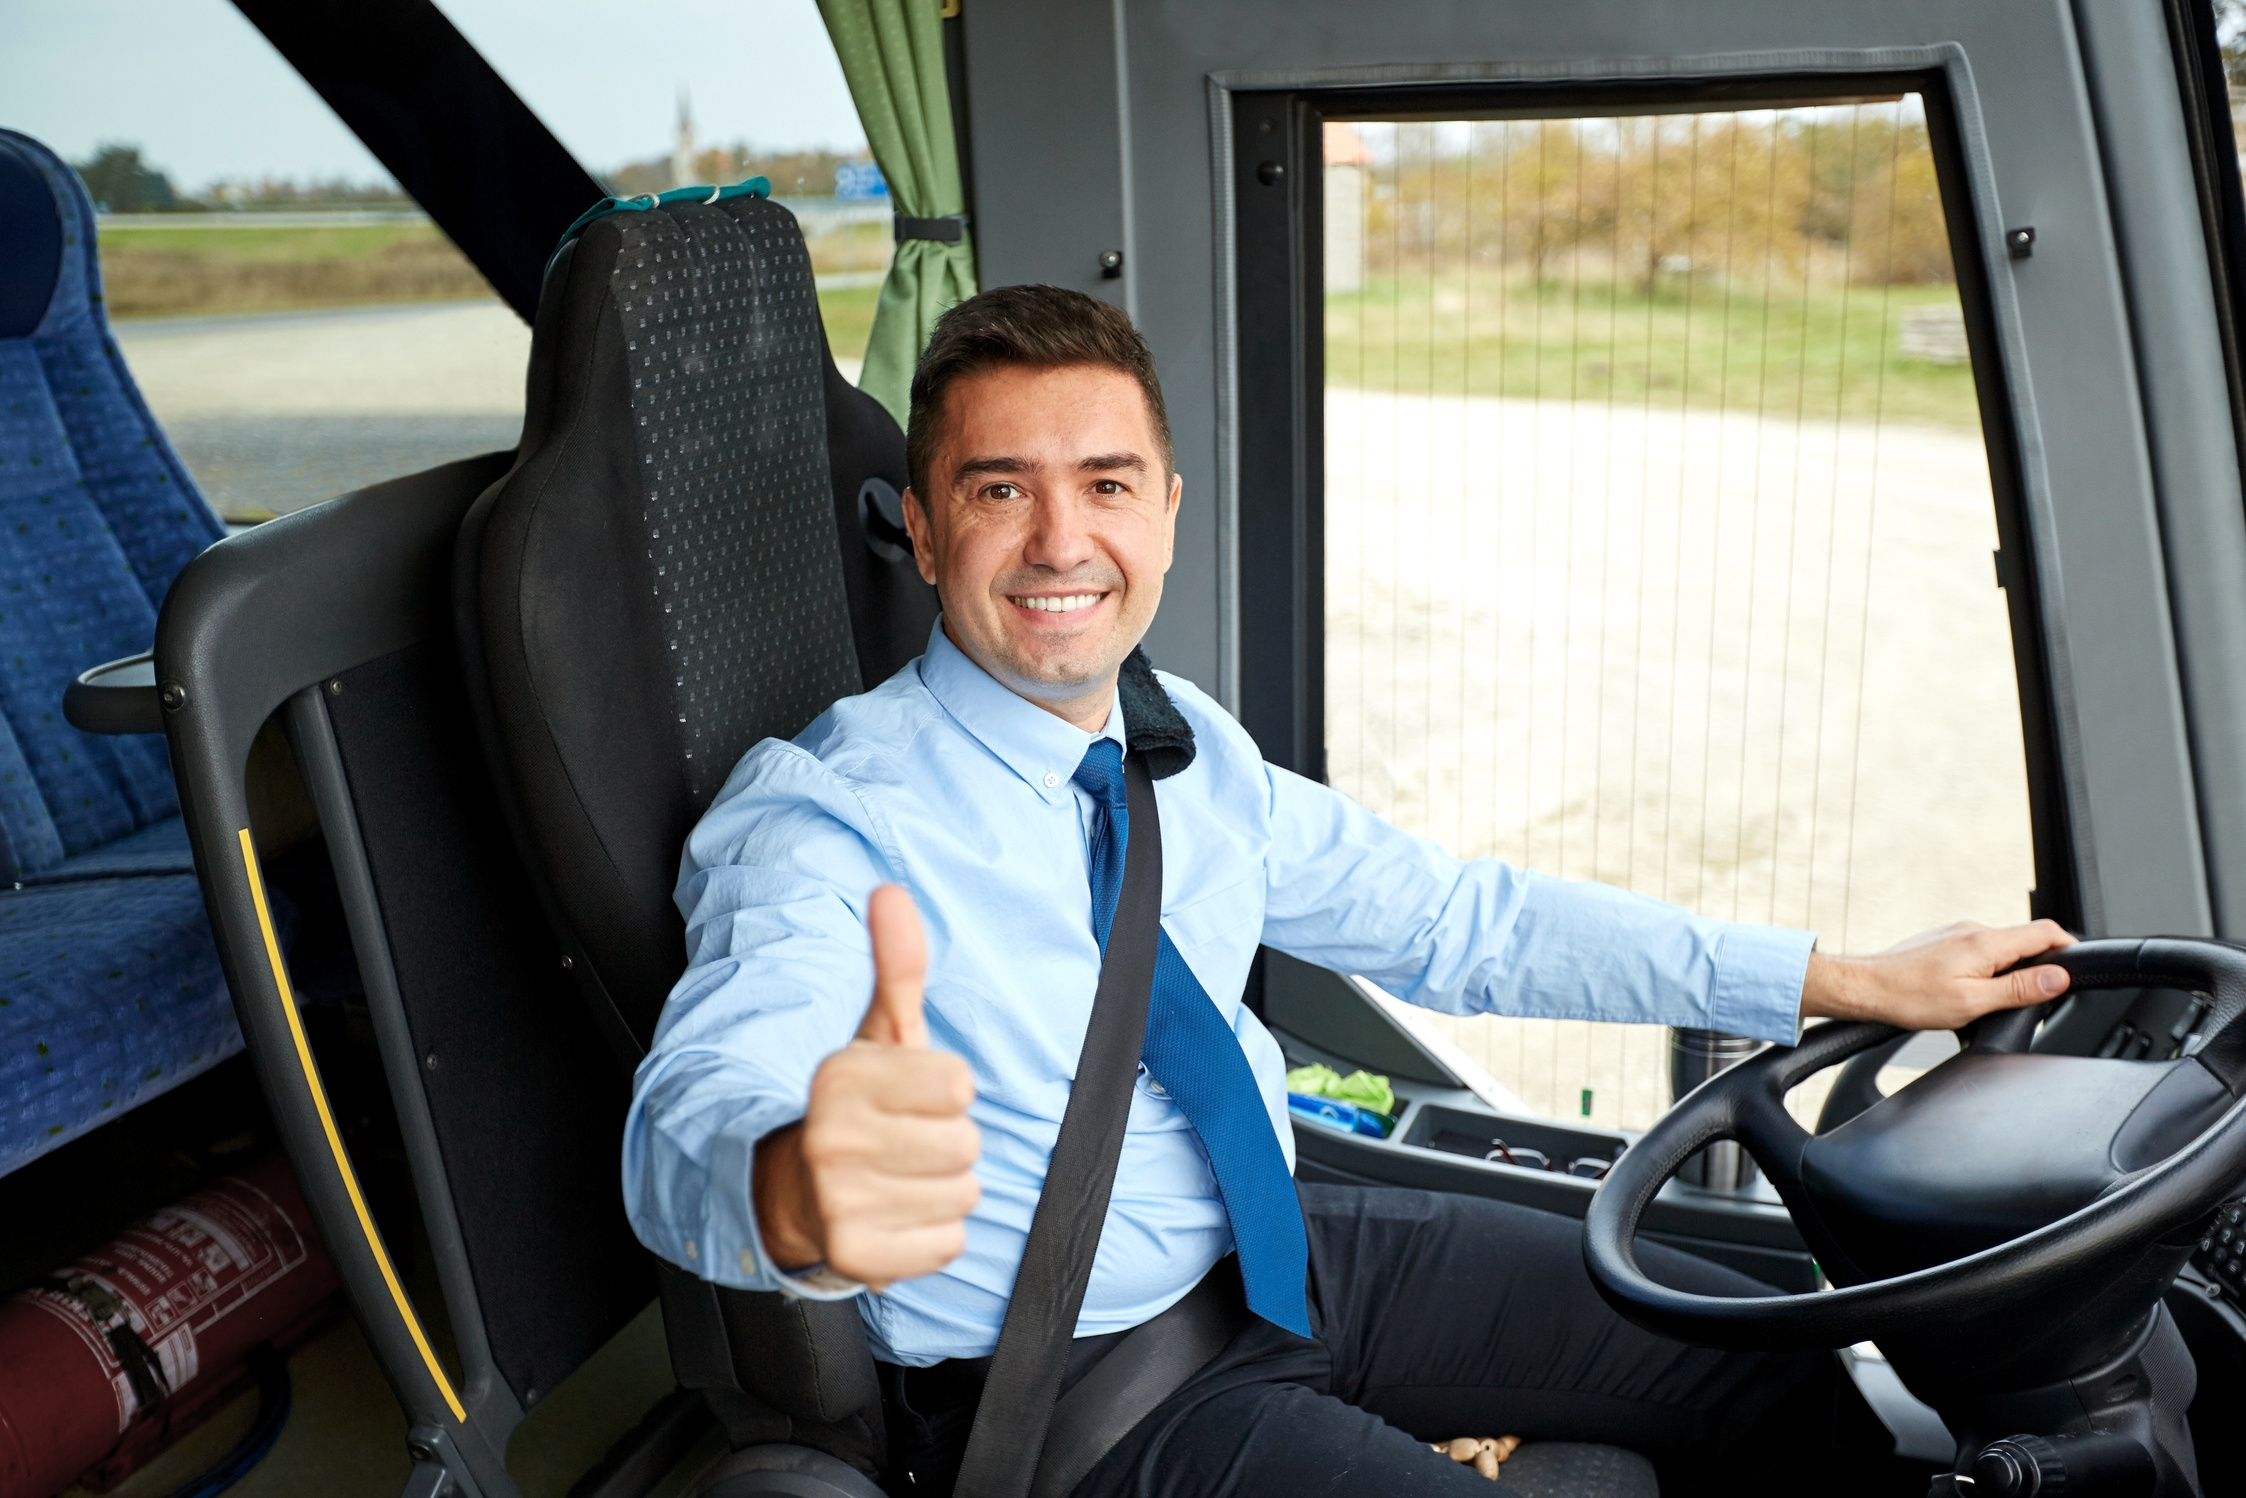 Driver Driving Bus